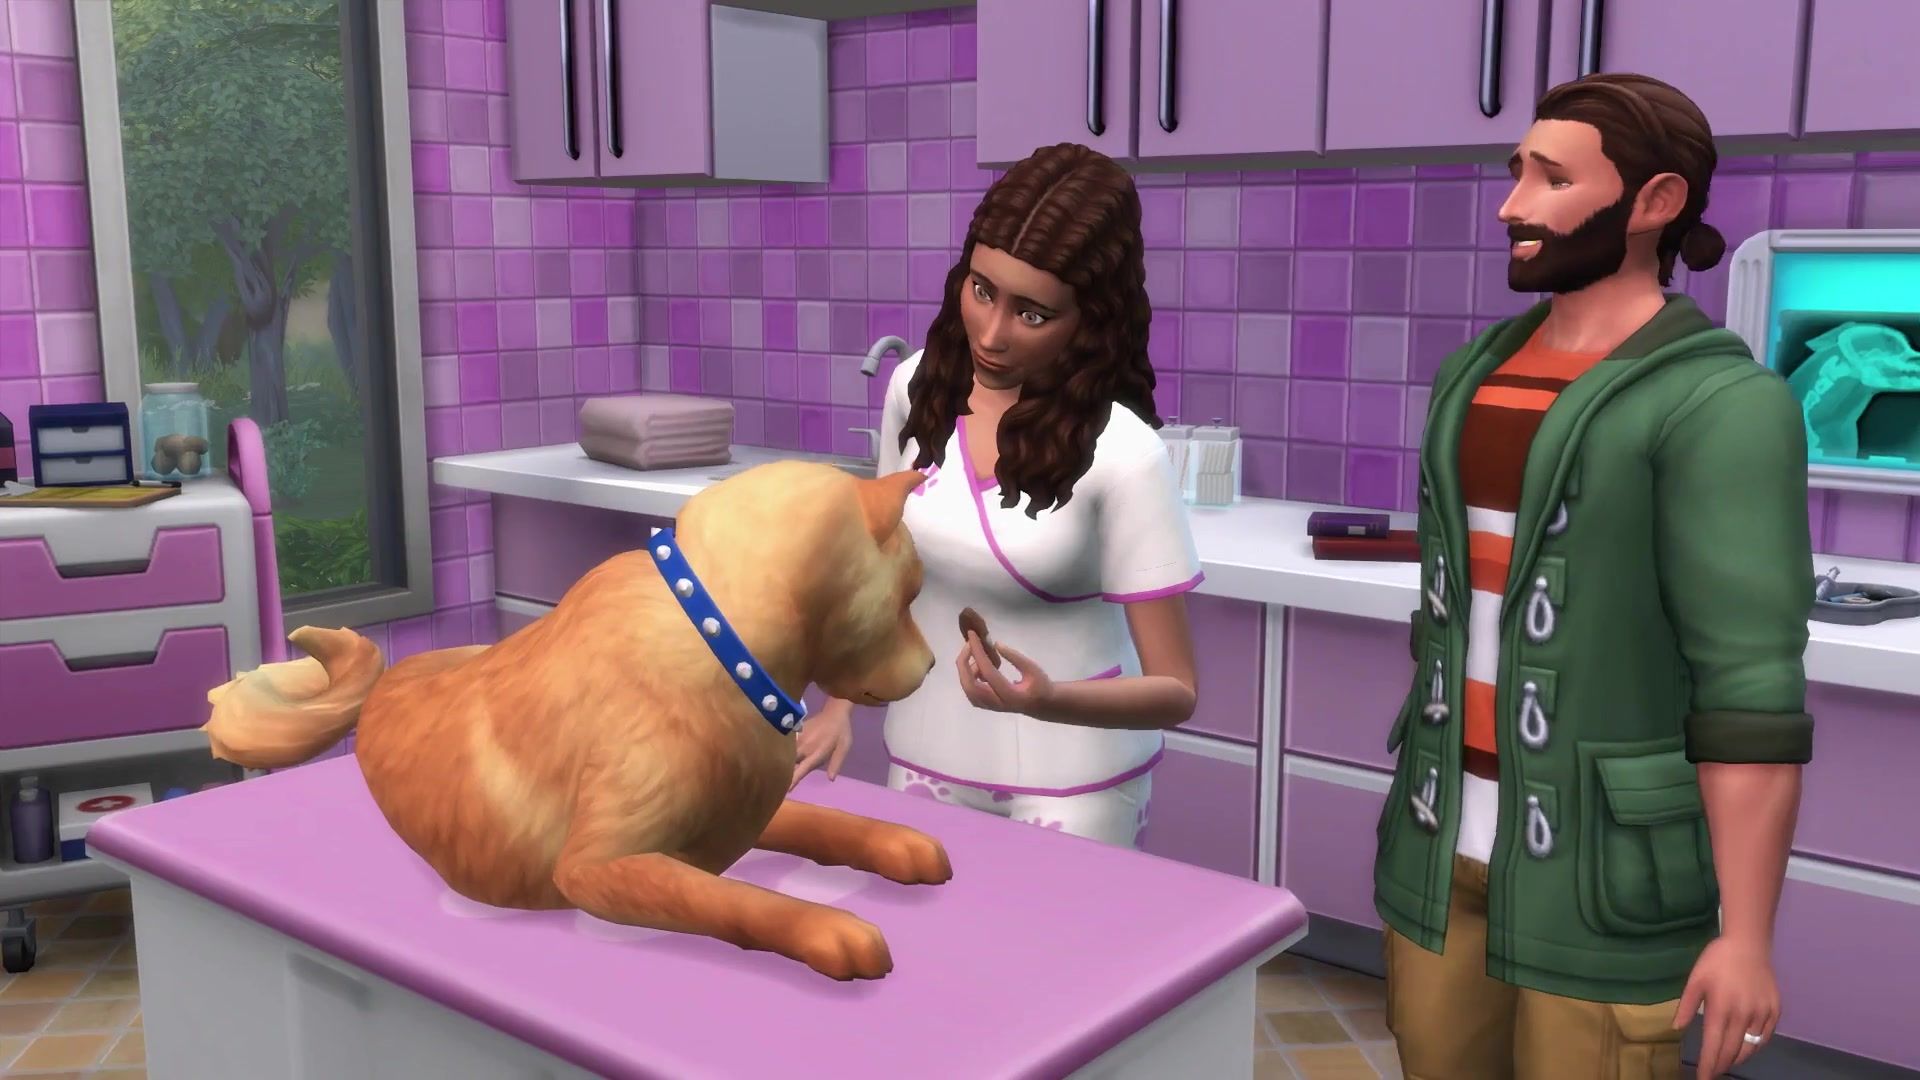 Take care of pets with the vet career in Sims 4 Cats  Dogs.